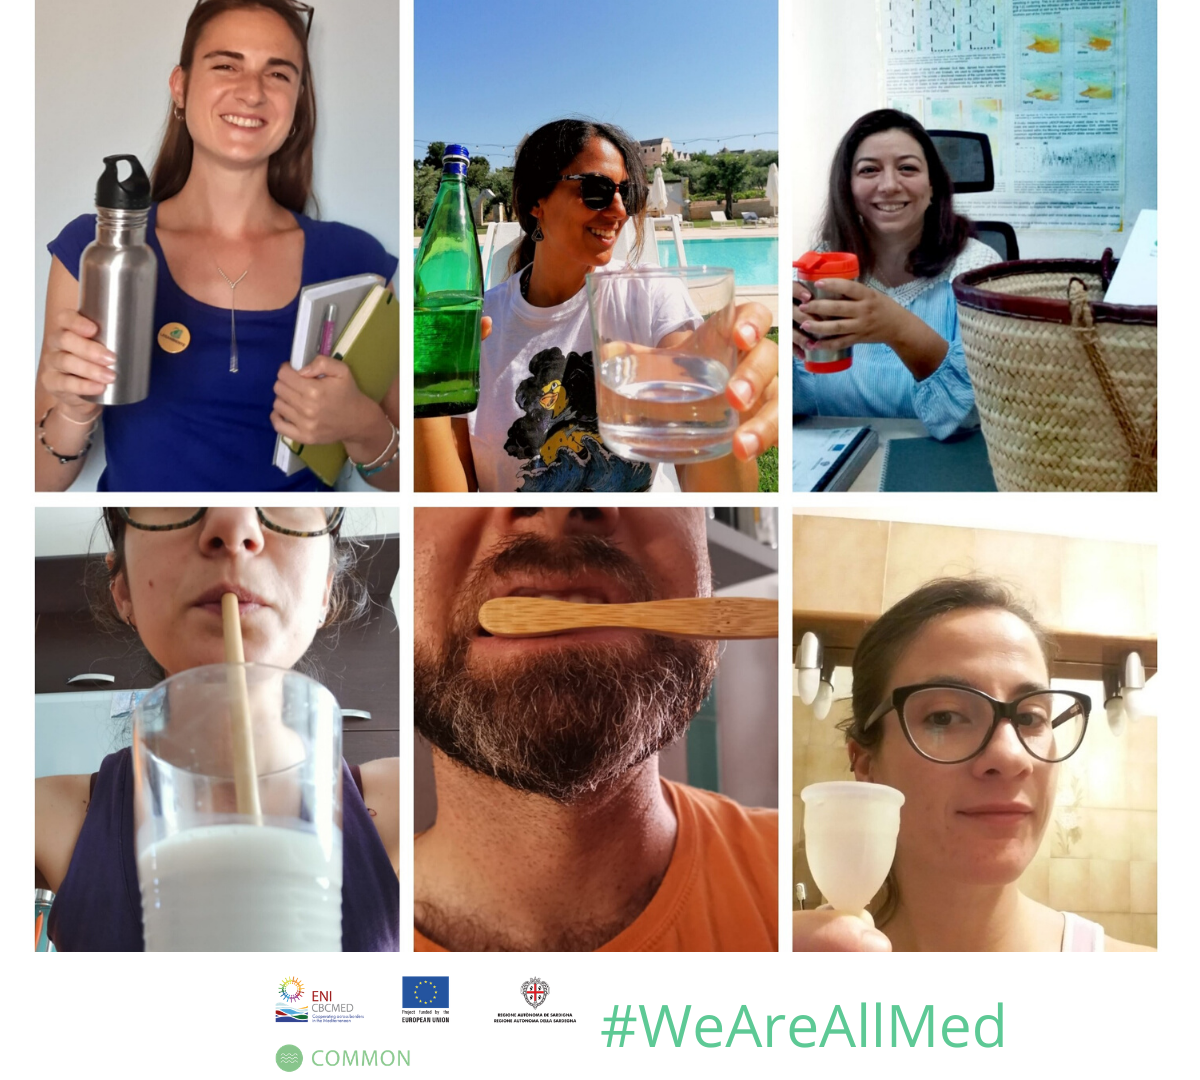 📍COMMON staff join the #plasticfreejuly! 
There are so many small daily actions that can reduce #plastic consumption, to make the #beaches 🏖️cleaner and to protect #OurOceans 🌊

Thanks to @EU_MARE for the initiative and to @vitcheva_eu
 for thinking of us!

#GOMED #WeAreAllMed